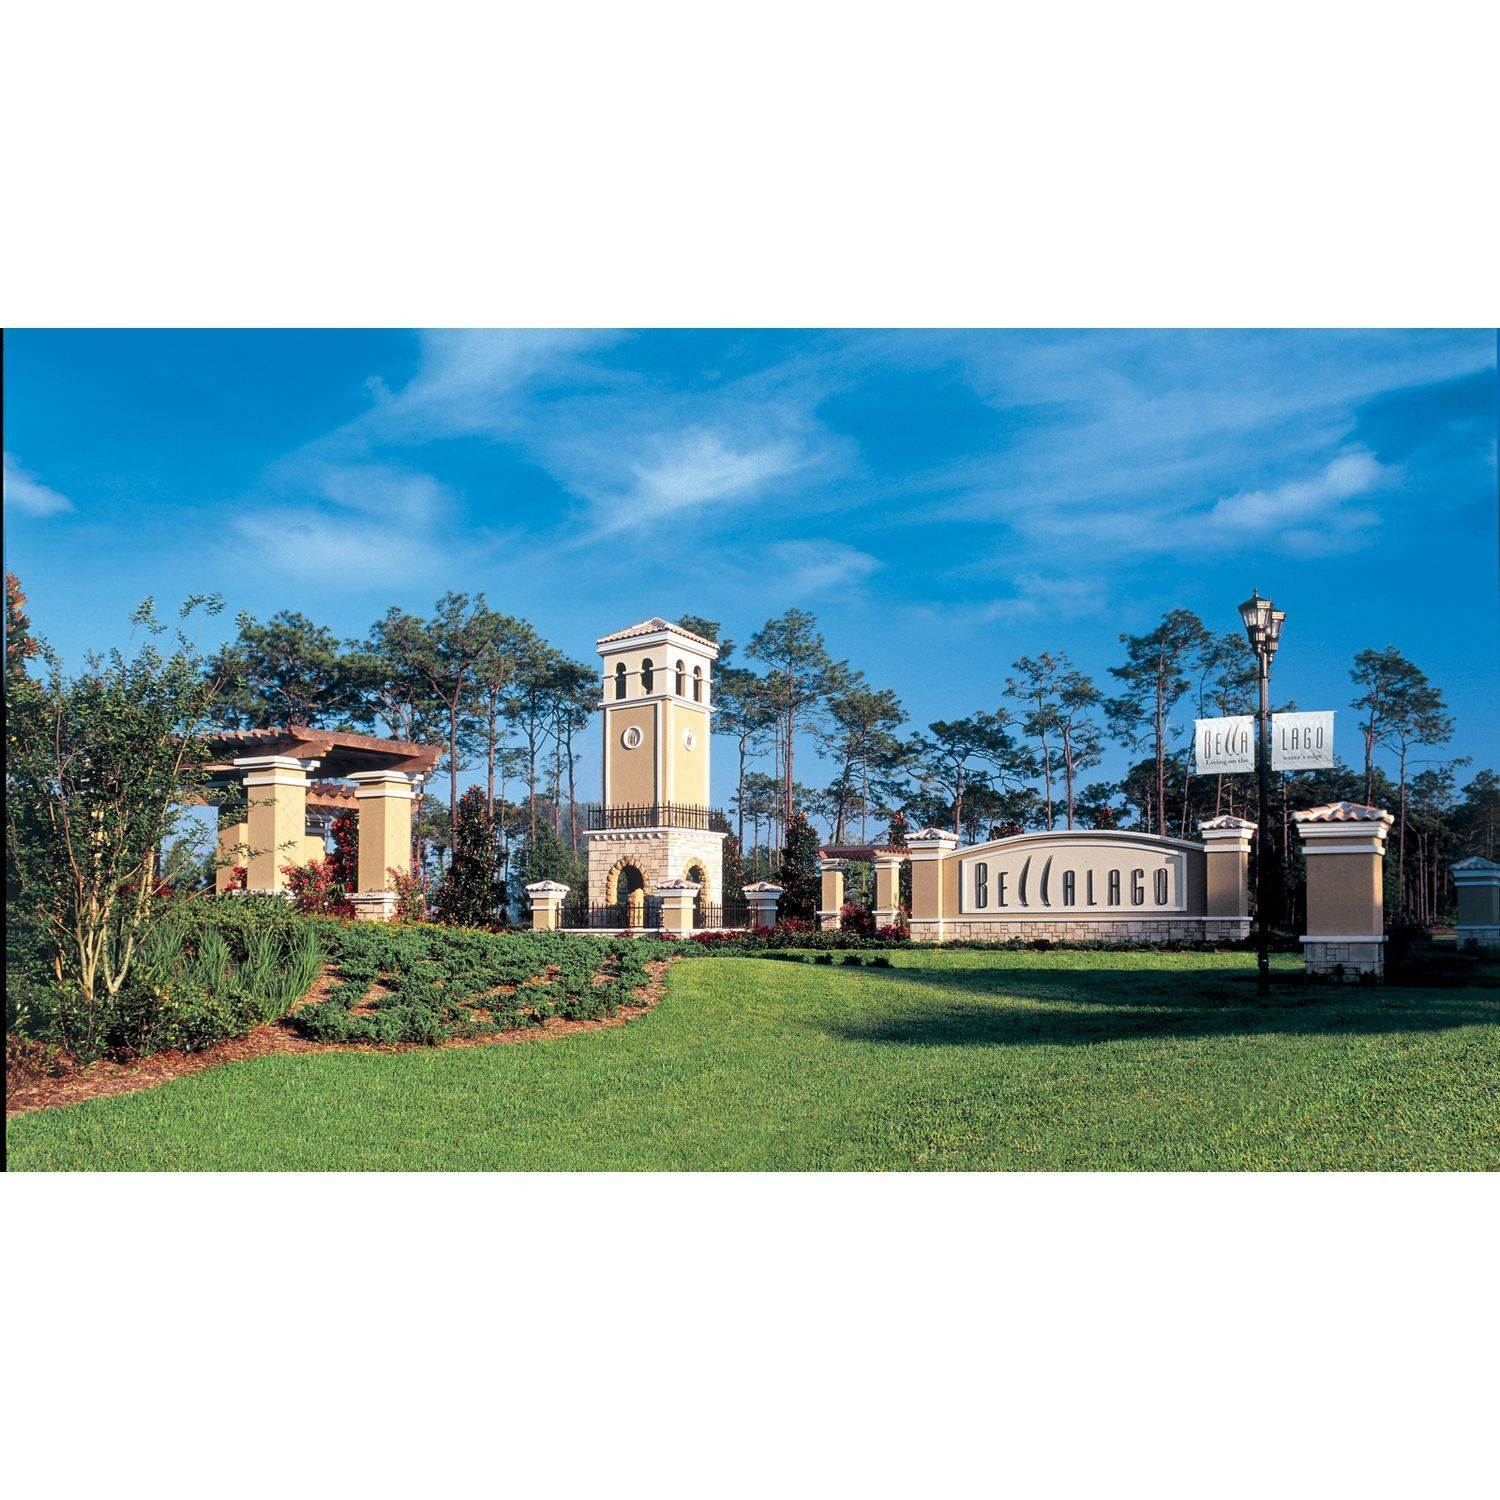 44. The Townhomes at Bellalago bâtiment à 3667 Circle Hook Street, Kissimmee, FL 34746